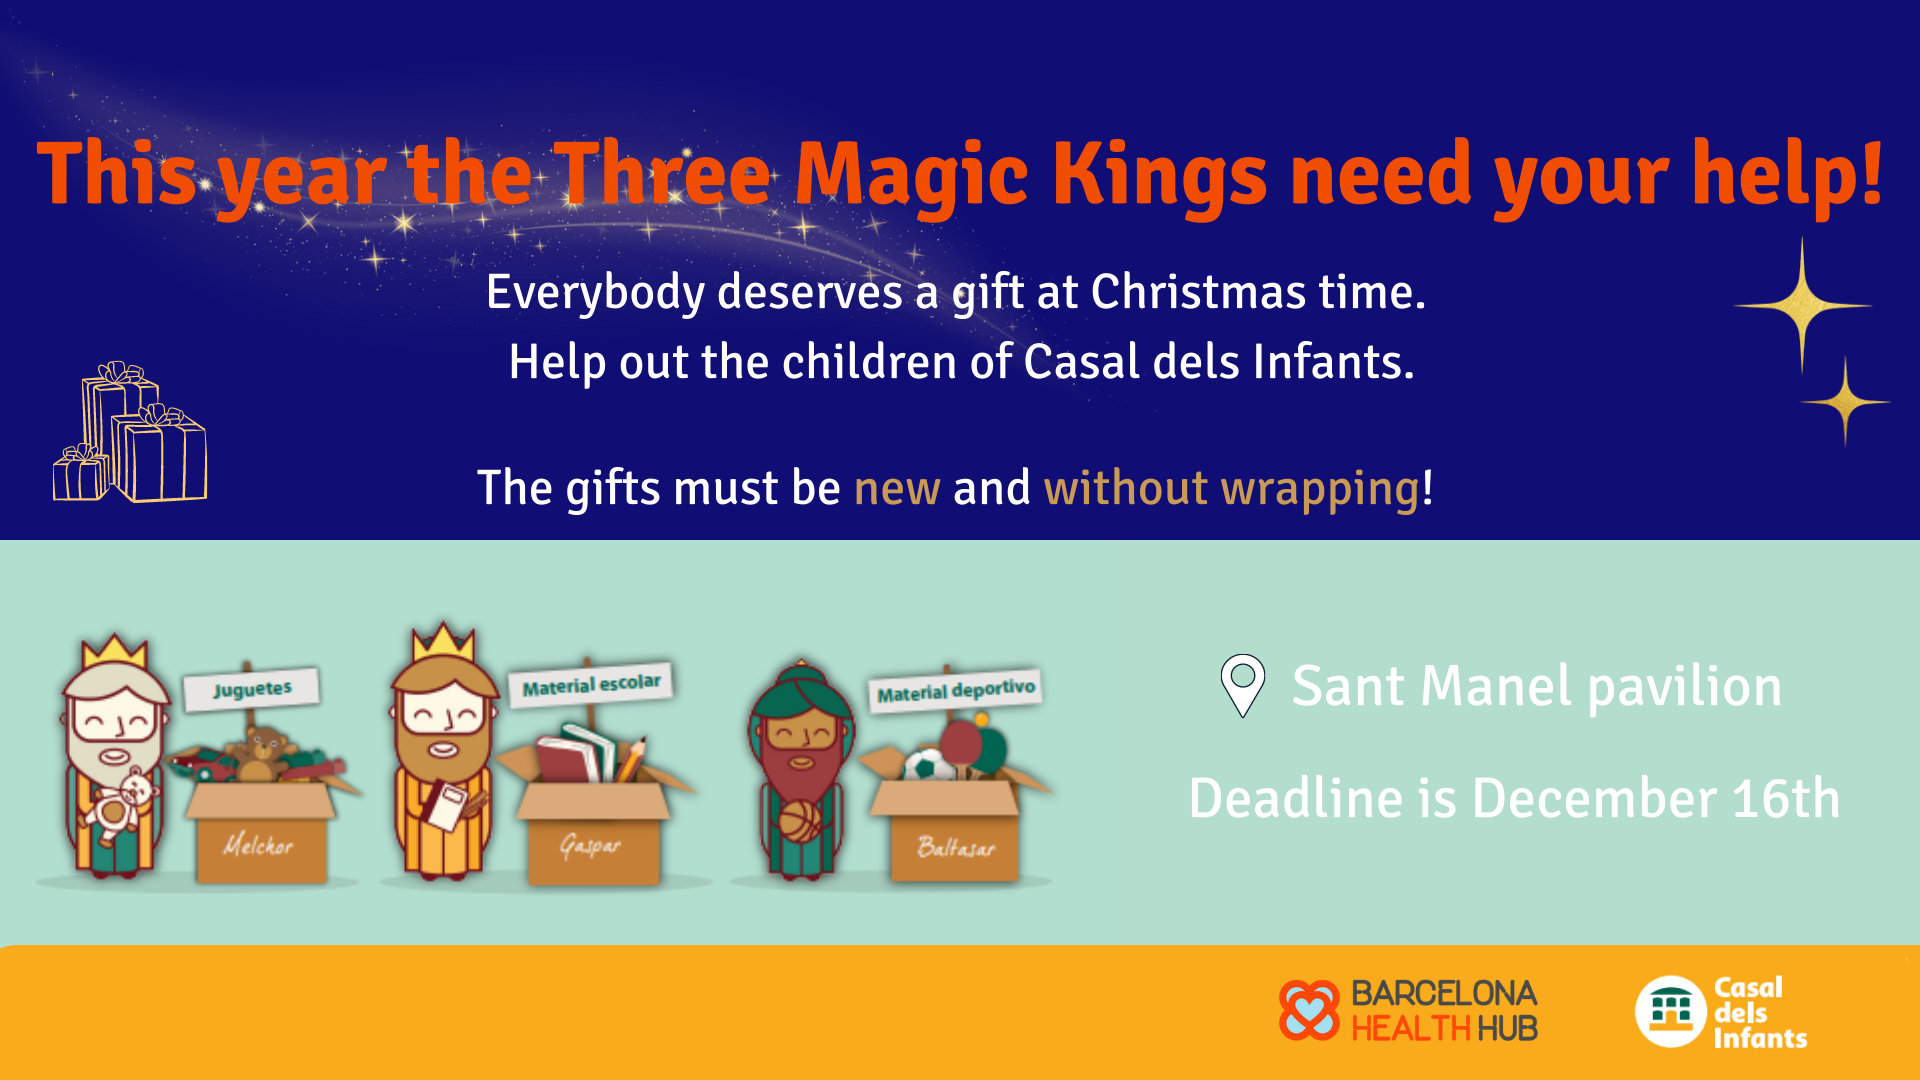 Help the children of Casal dels Infants this Christmas!